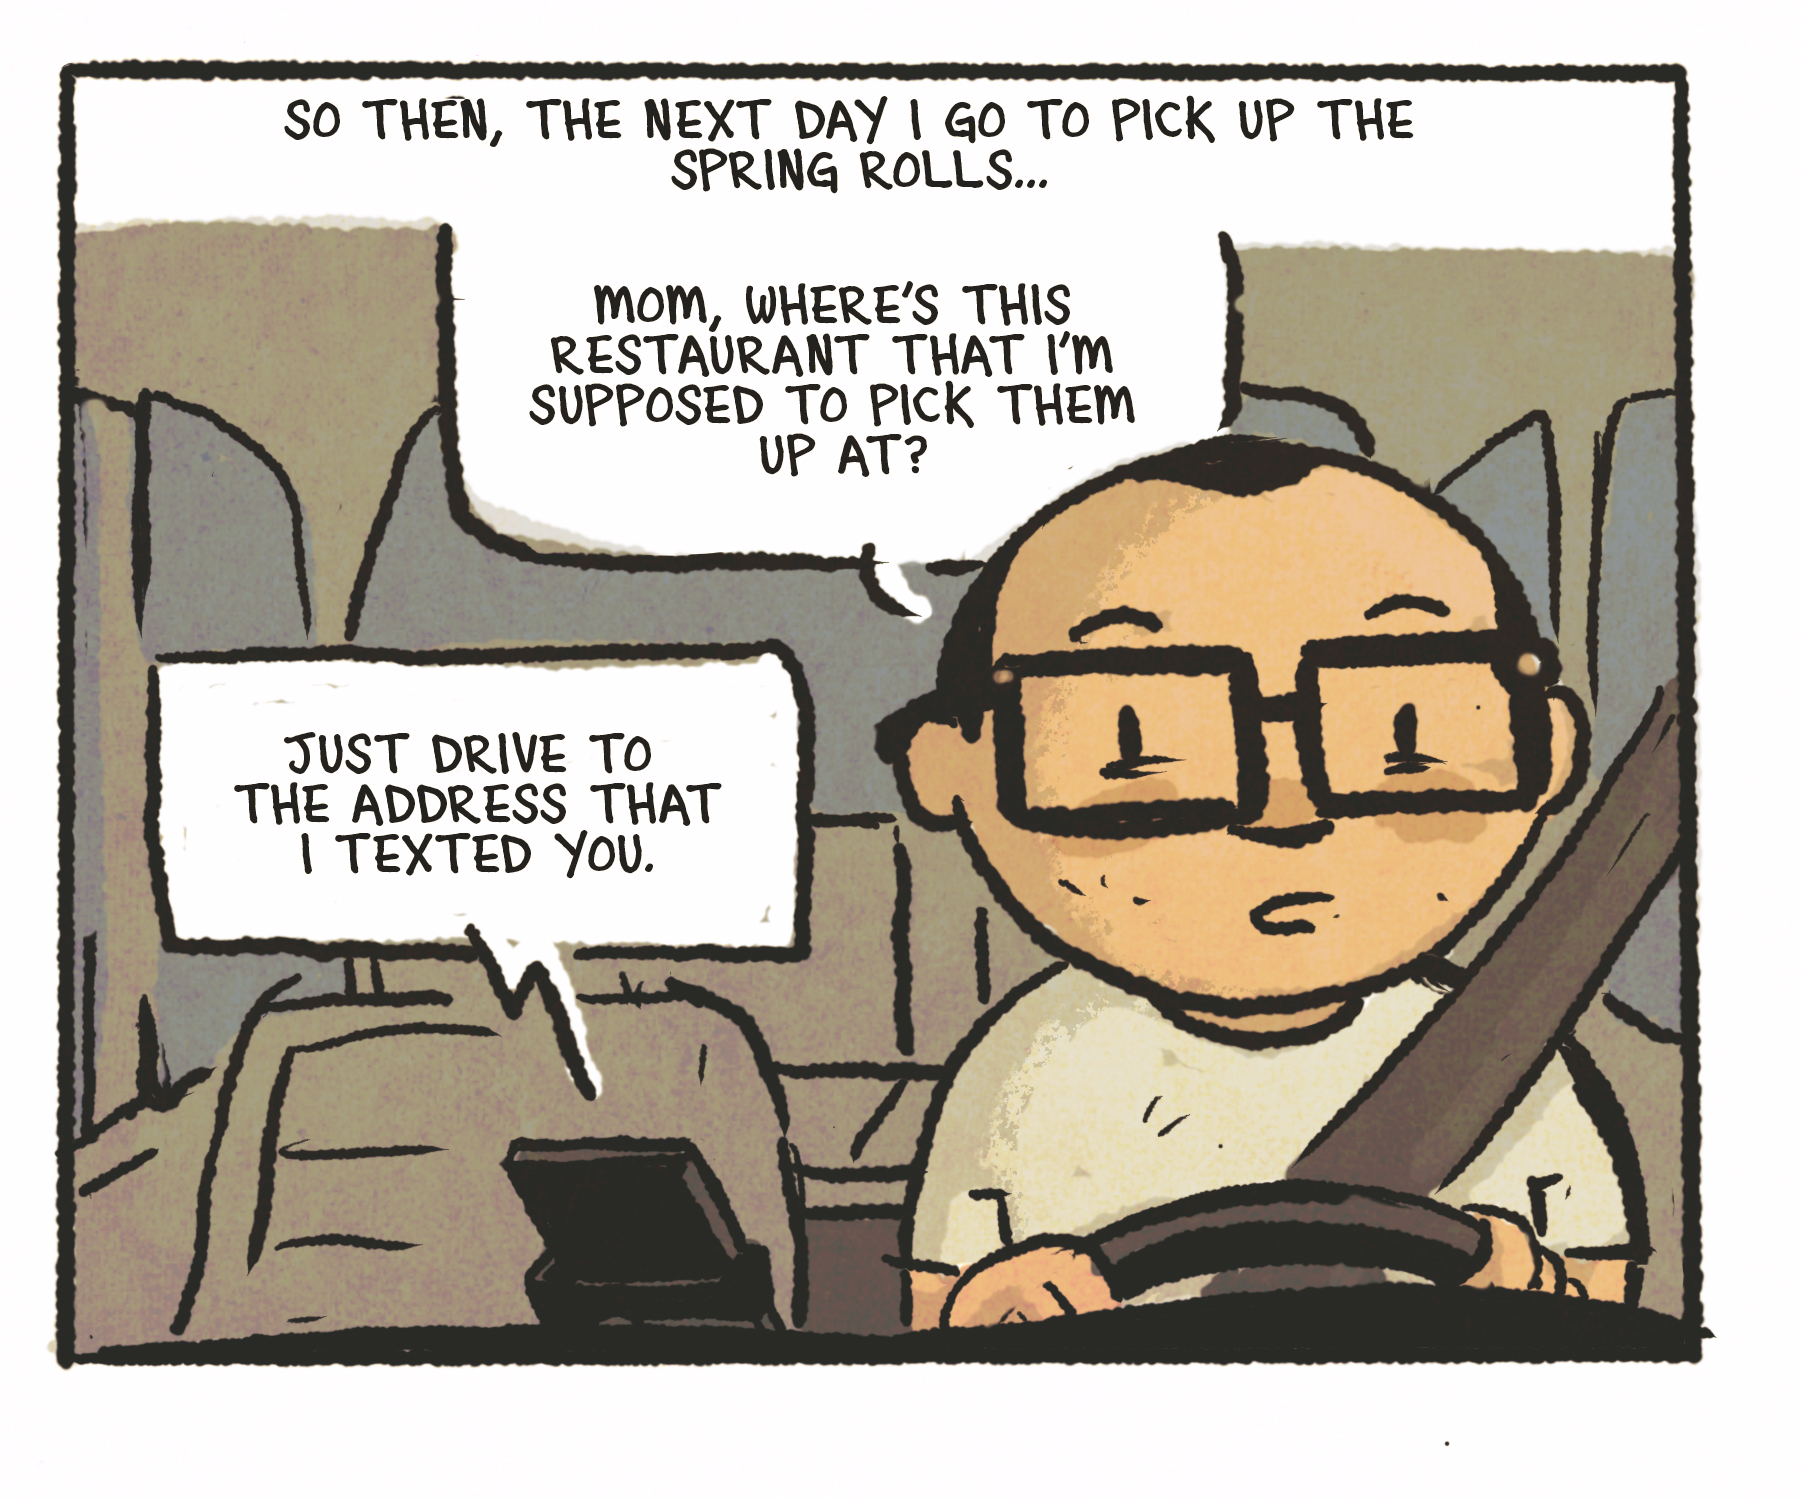 Comics panel: The man is driving his car. Speech bubbles read, "So then, the next day I go to pick up the spring rolls. 'Mom, where's this restaurant that I'm supposed to pick them up at?' 'Just drive to the address that I texted you.'"